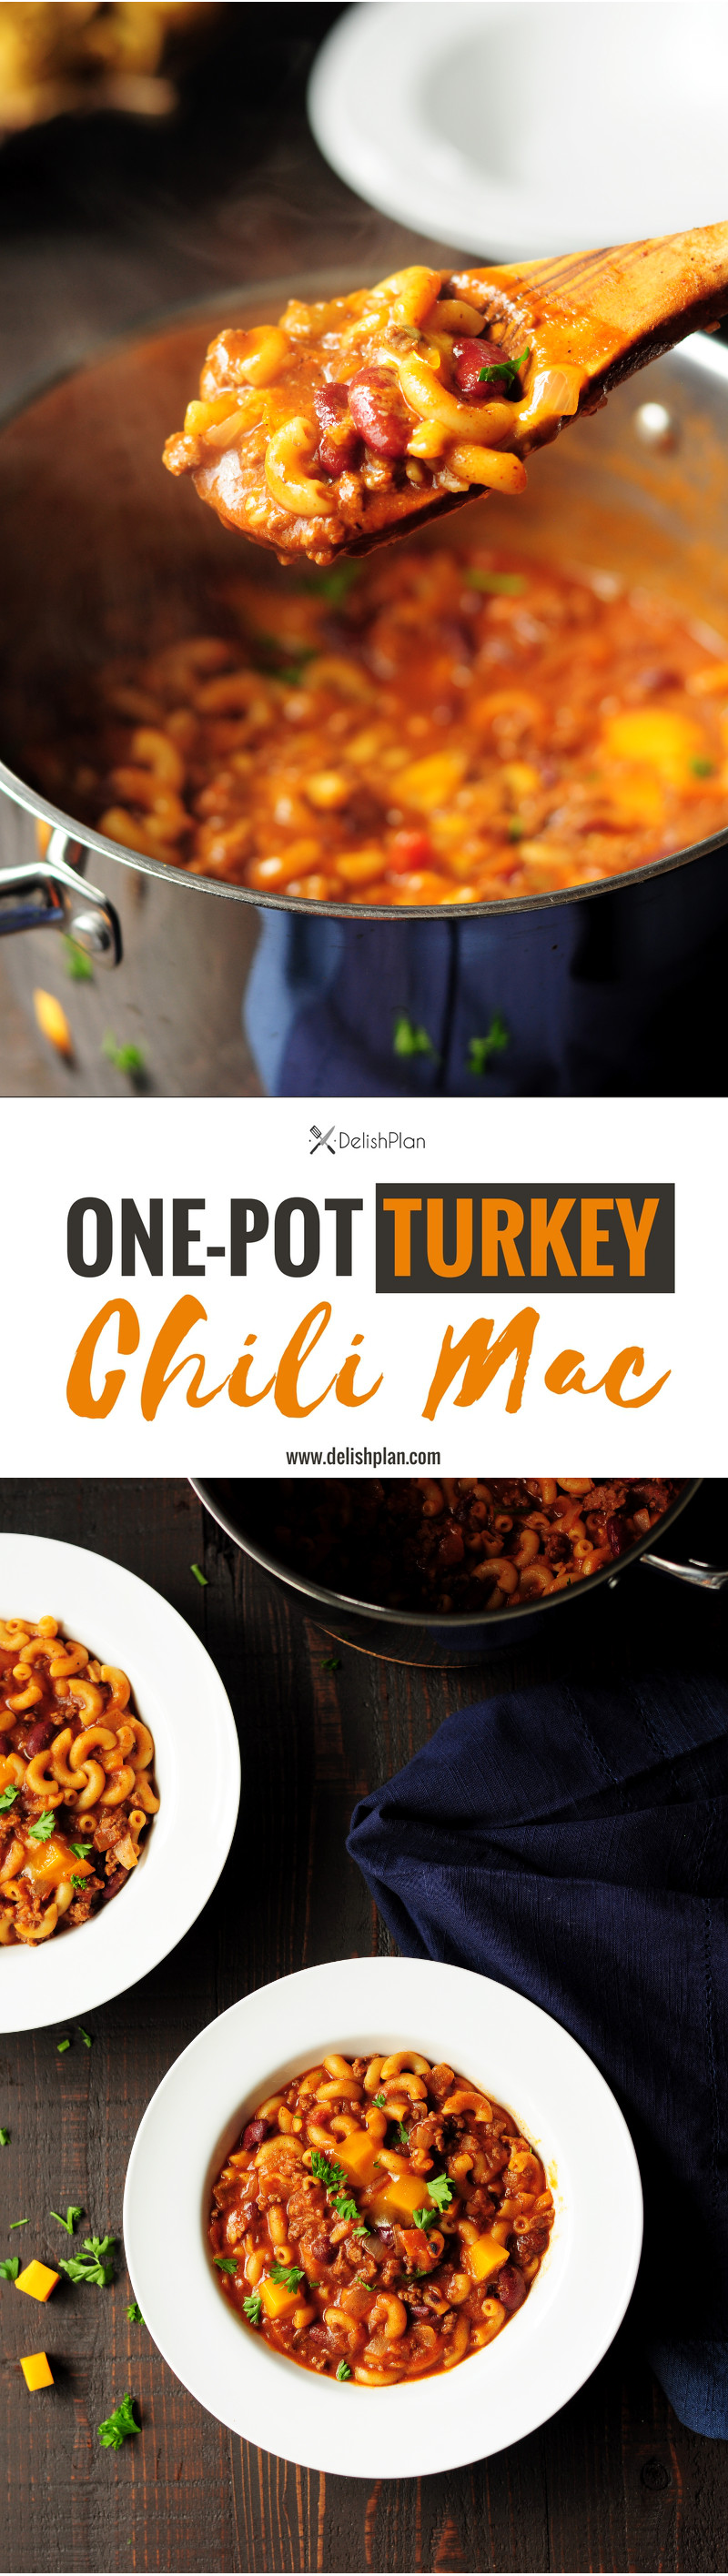 Love mac and cheese? This one-pot chili mac recipe can totally satisfy you. It's an exciting meal with a healthy spin that’s designed for busy weeknights.